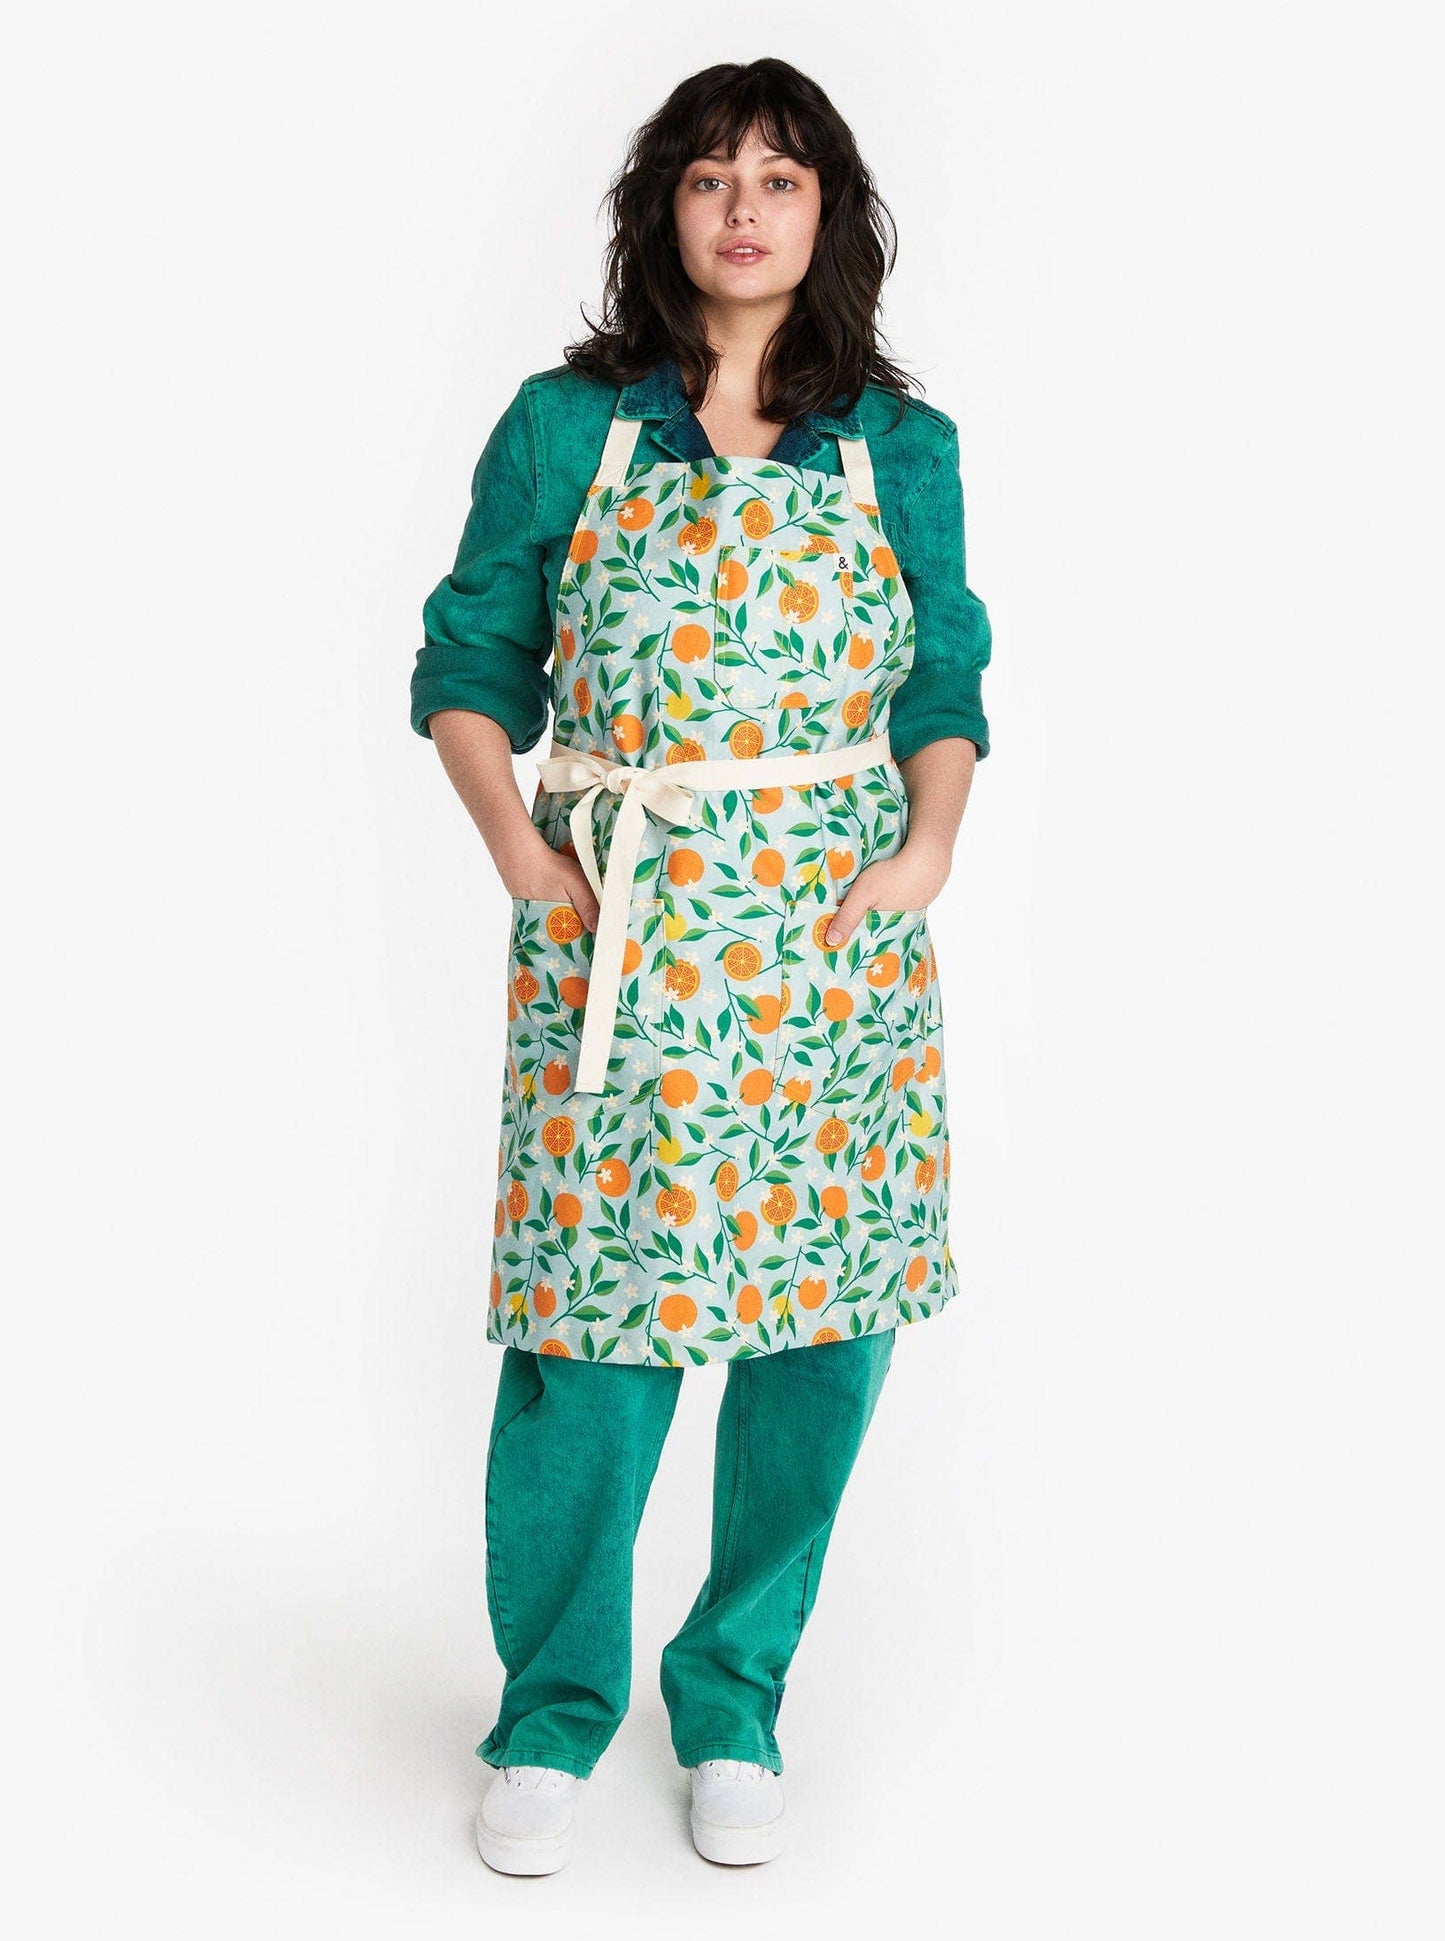 Adult size apron -- light blue background with orange + leaf print and cream neck loop + tie 